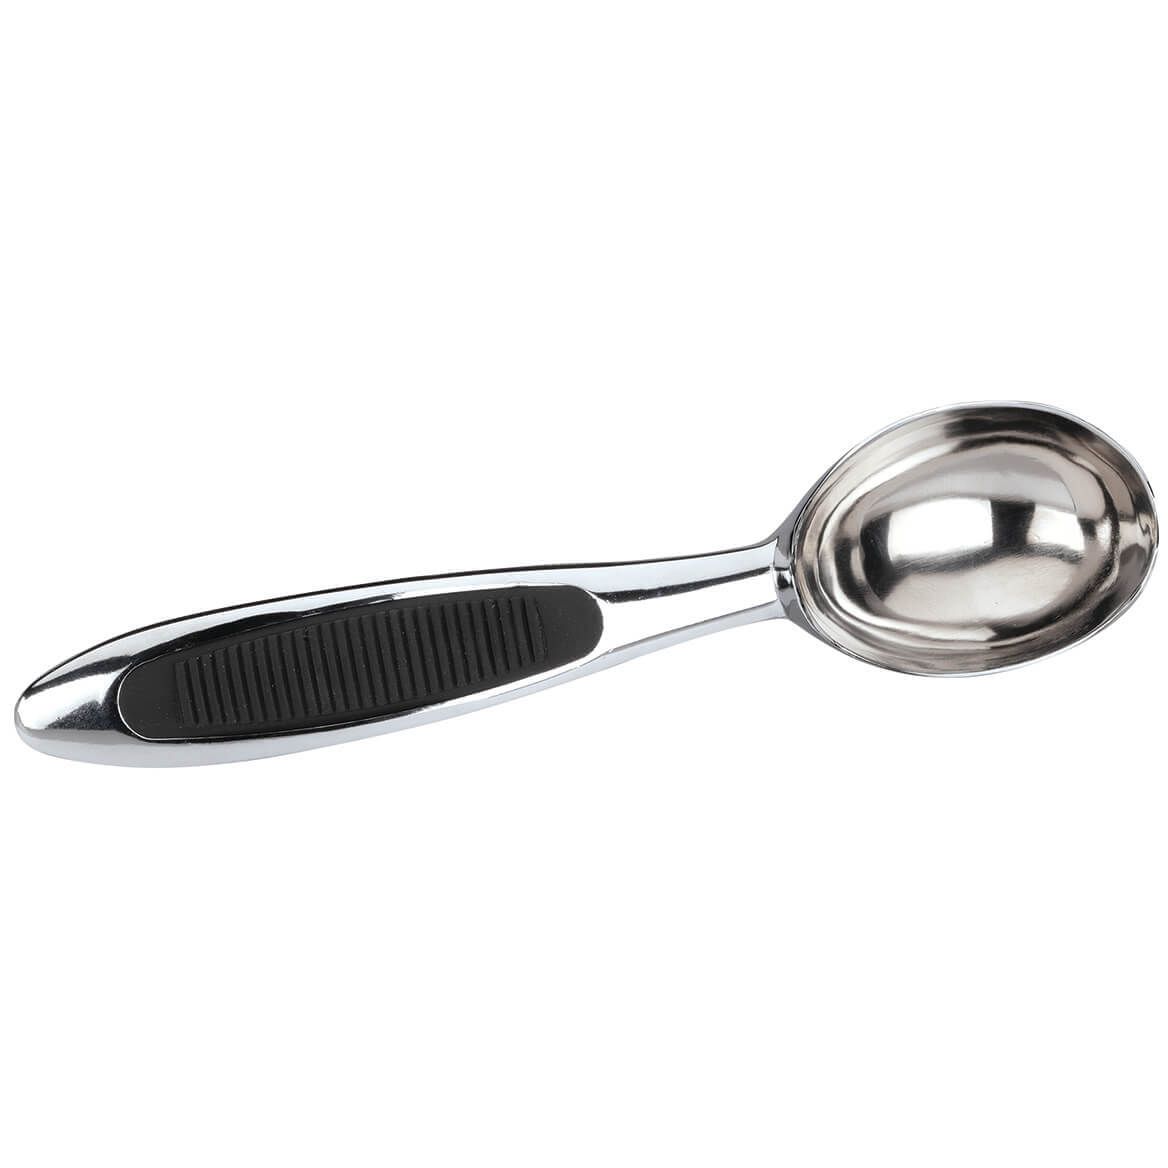 Stainless Steel Ice Parlor Scoop by Home Marketplace + '-' + 369173